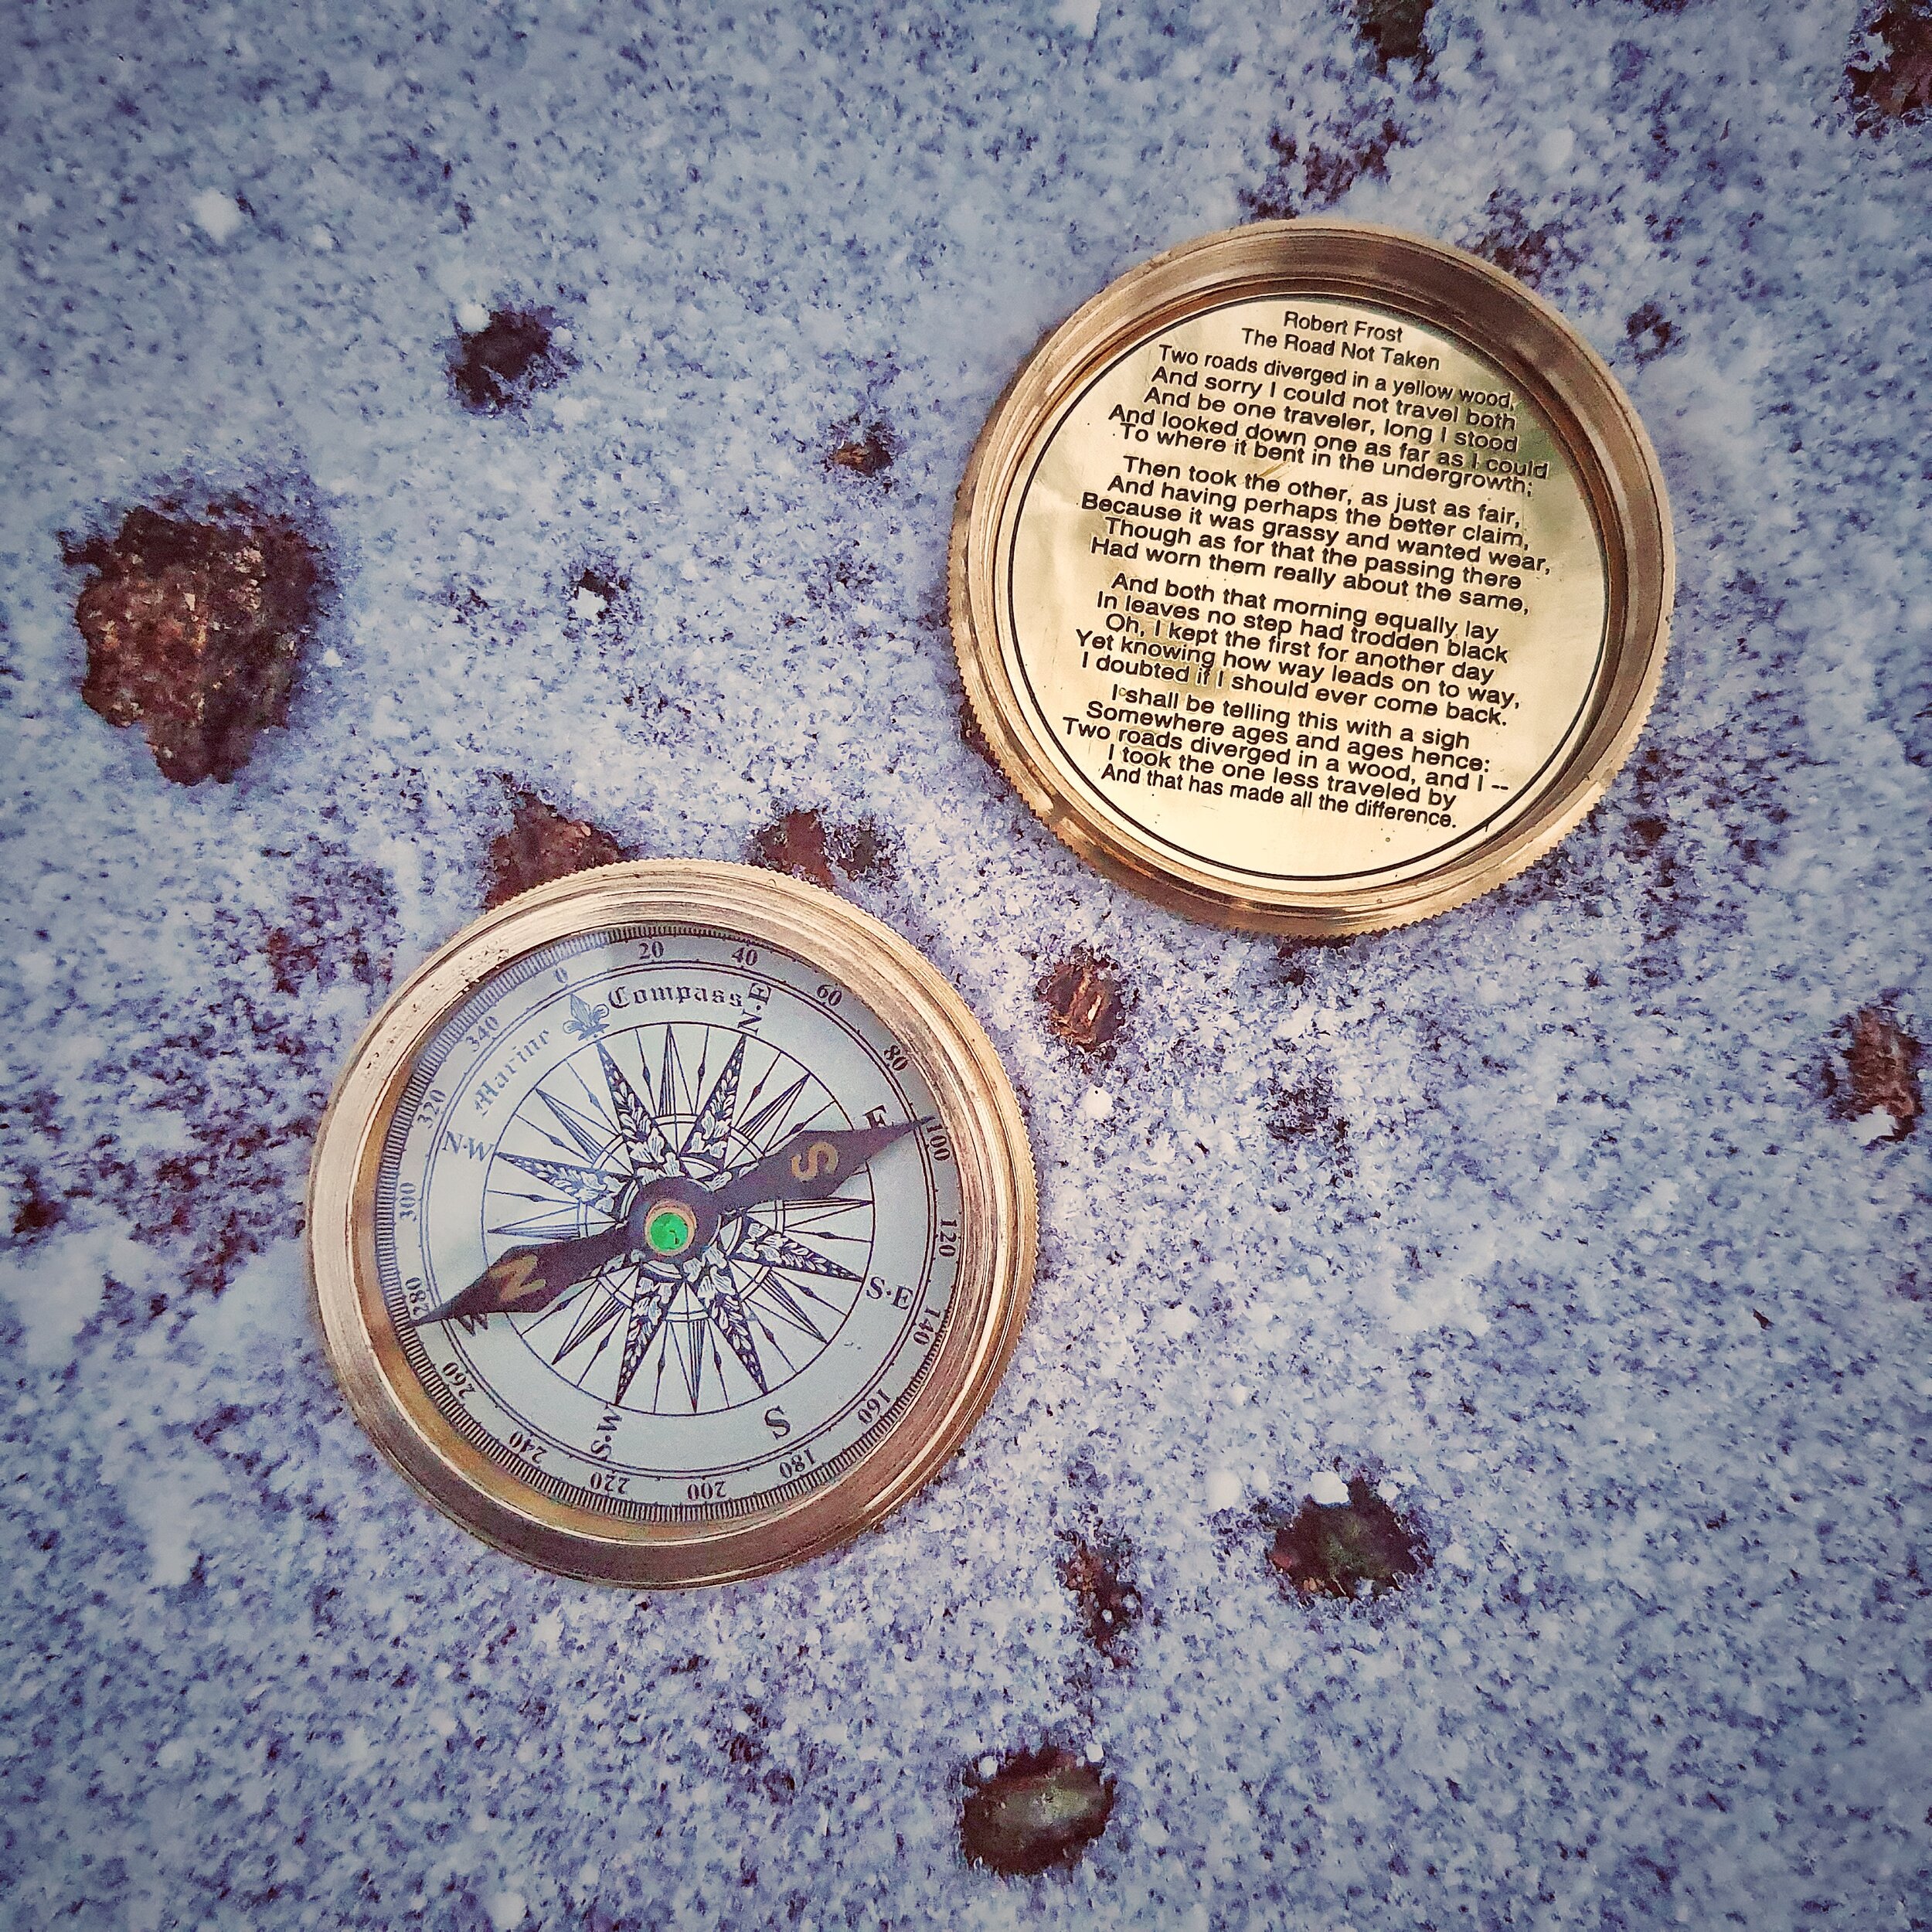 Details about   Robert Frost Poem Nautical Antique Brass Marine Pocket Compass With Leather Case 